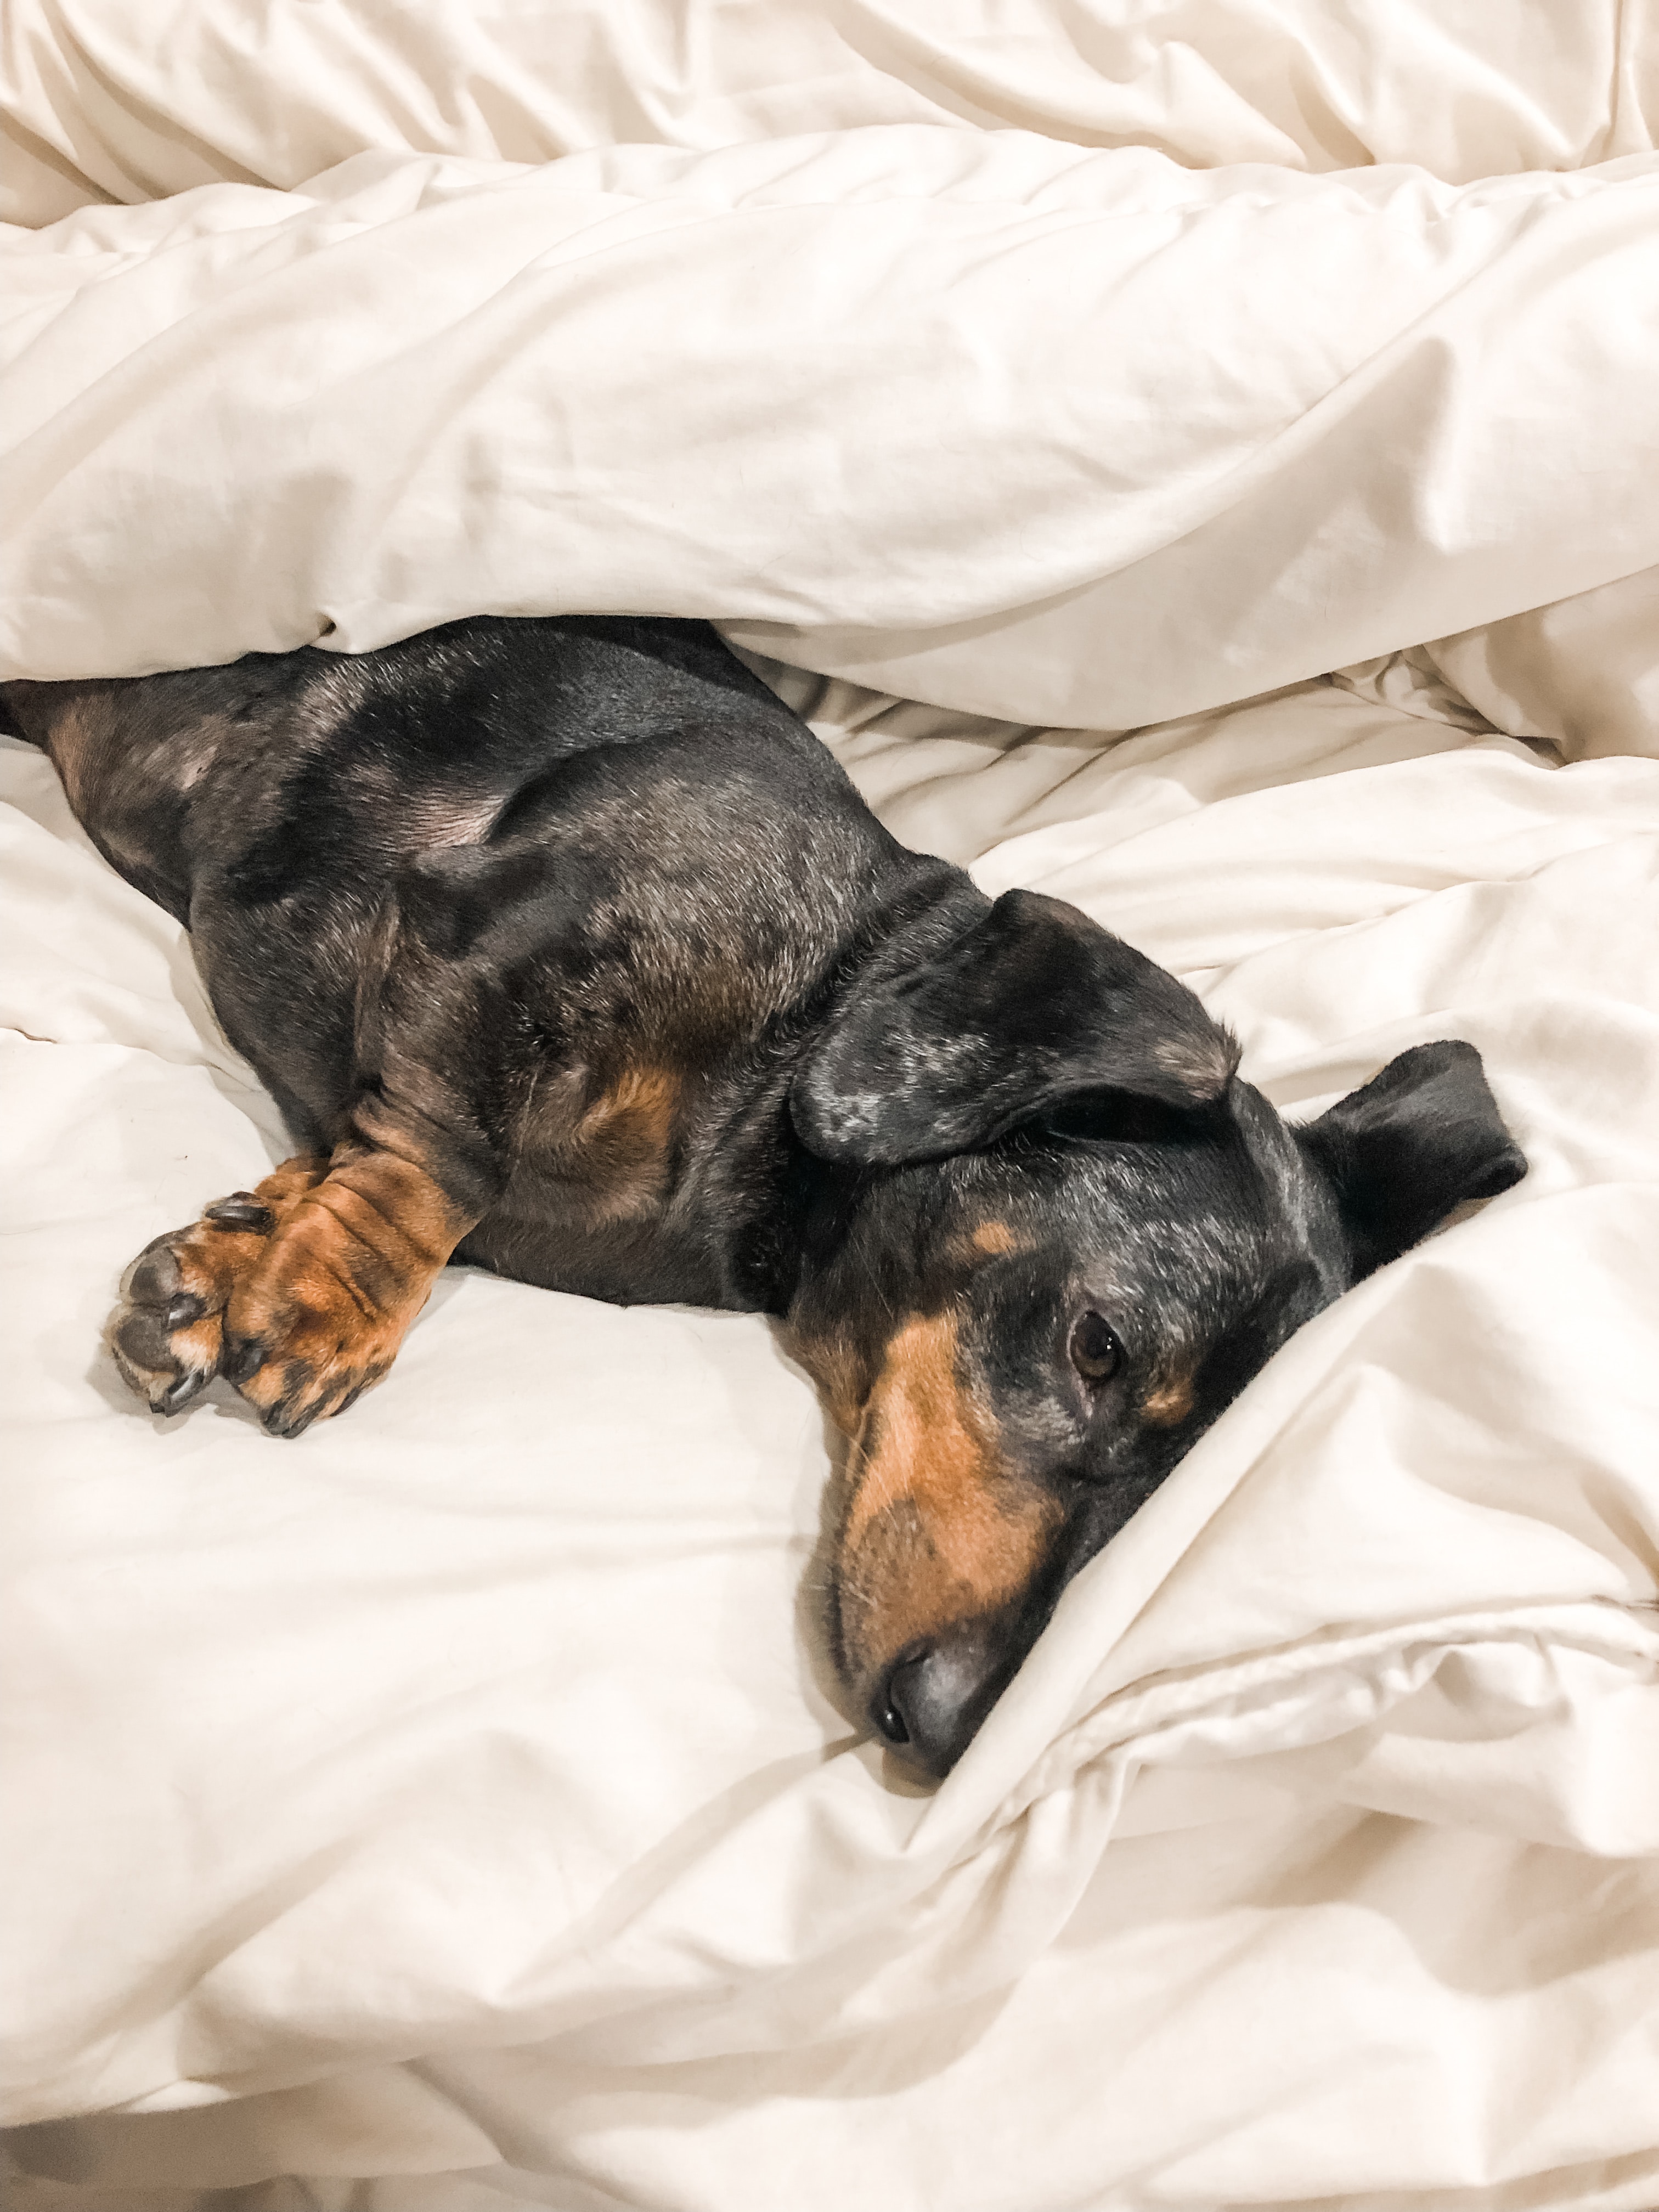 Dapple Dachshund makes himself comfy on cozy bed